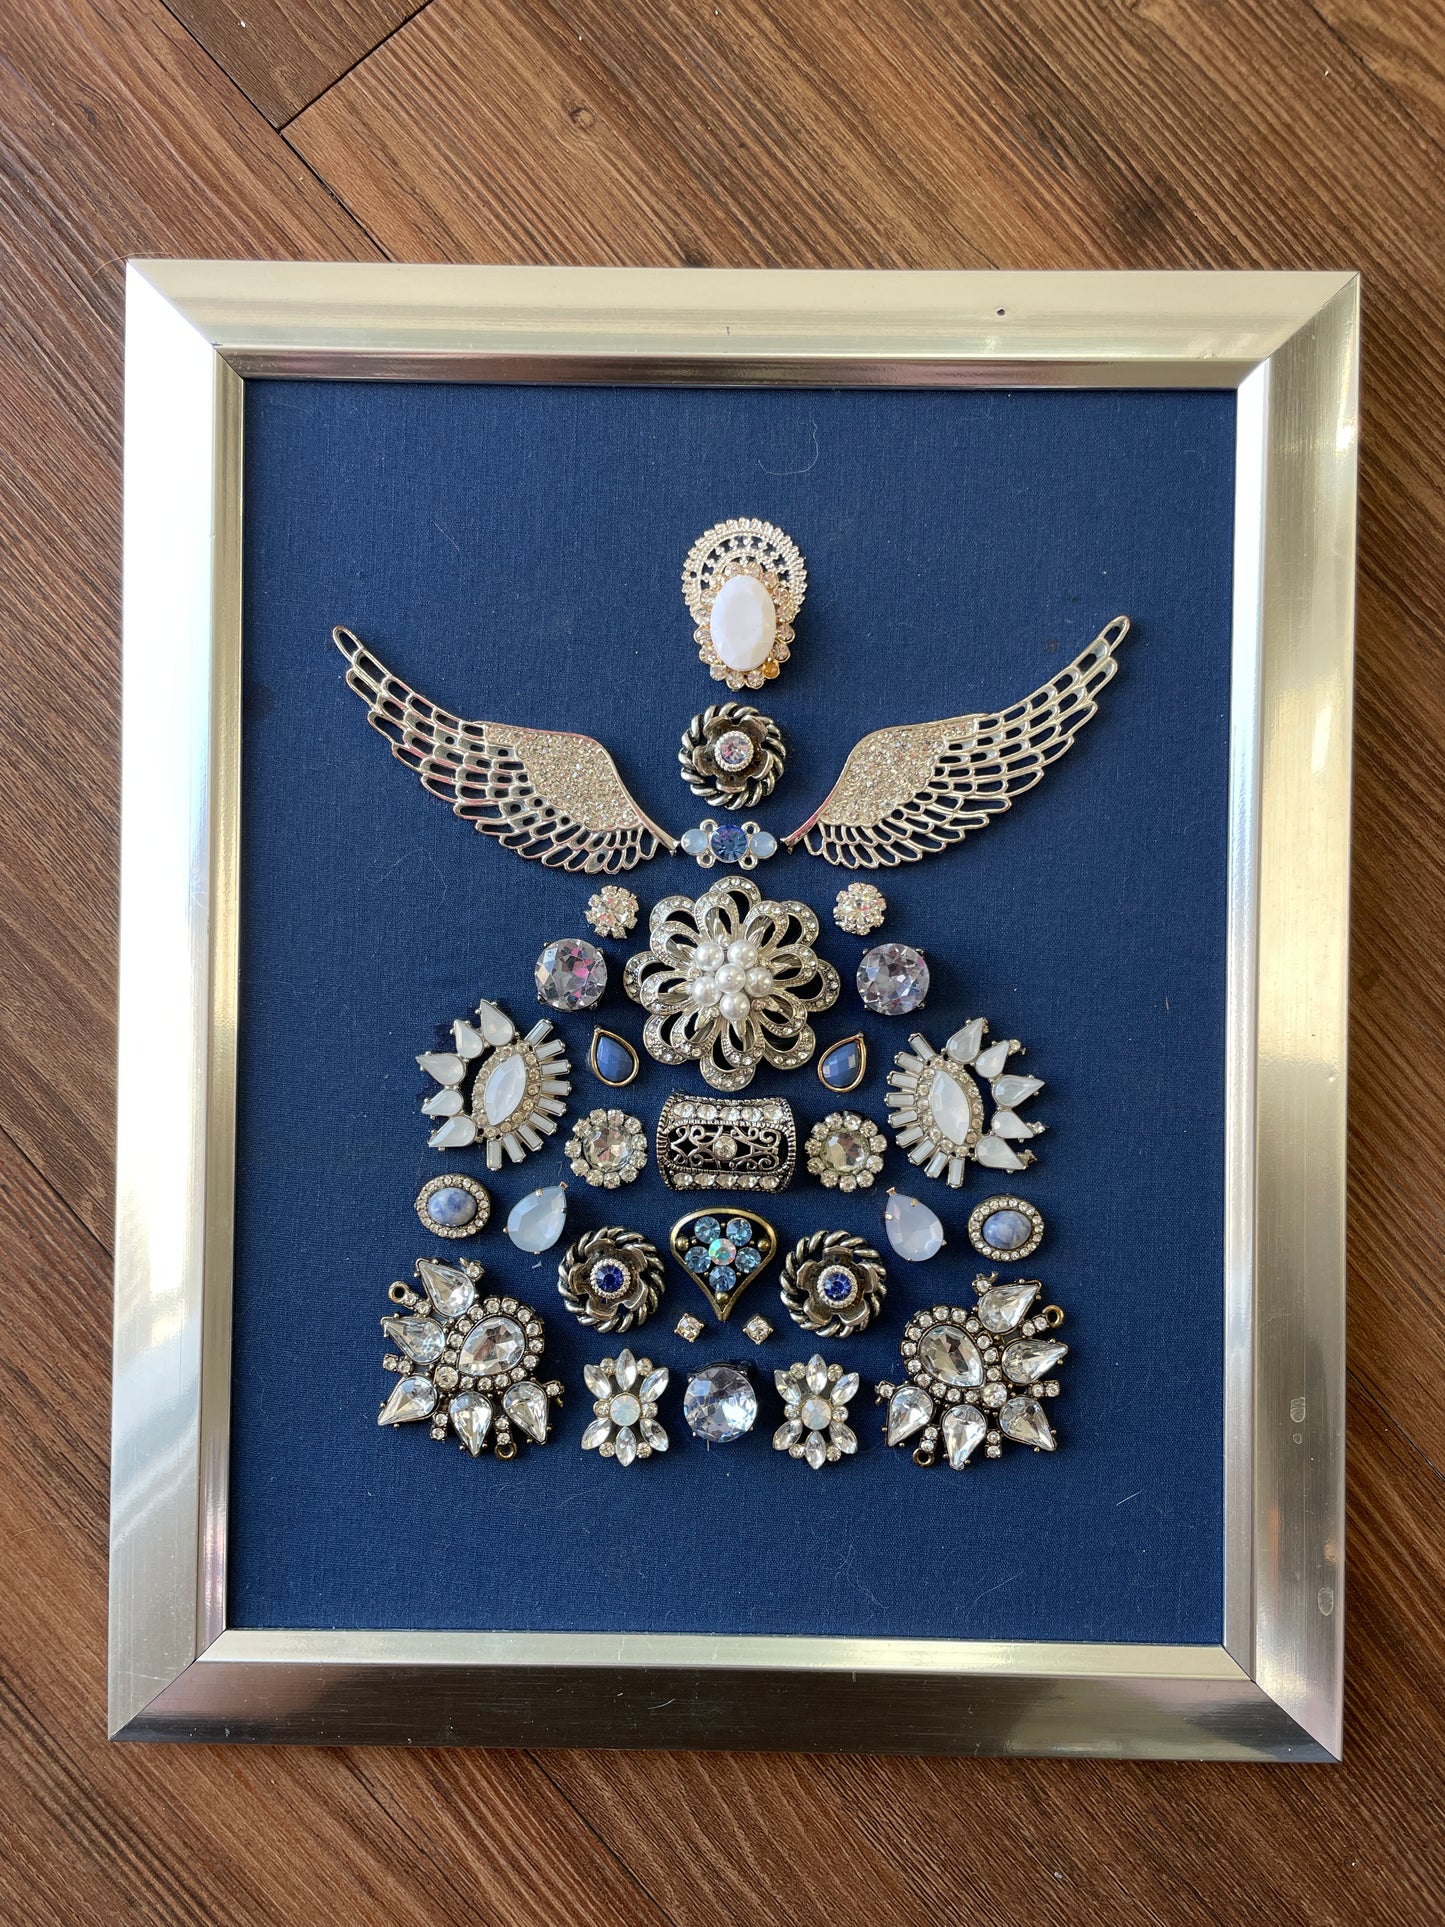 Blue and Silver Framed Jewelry Angel Christmas Tree Handmade with Over 25 Pieces of Vintage & Upcycled Jewelry